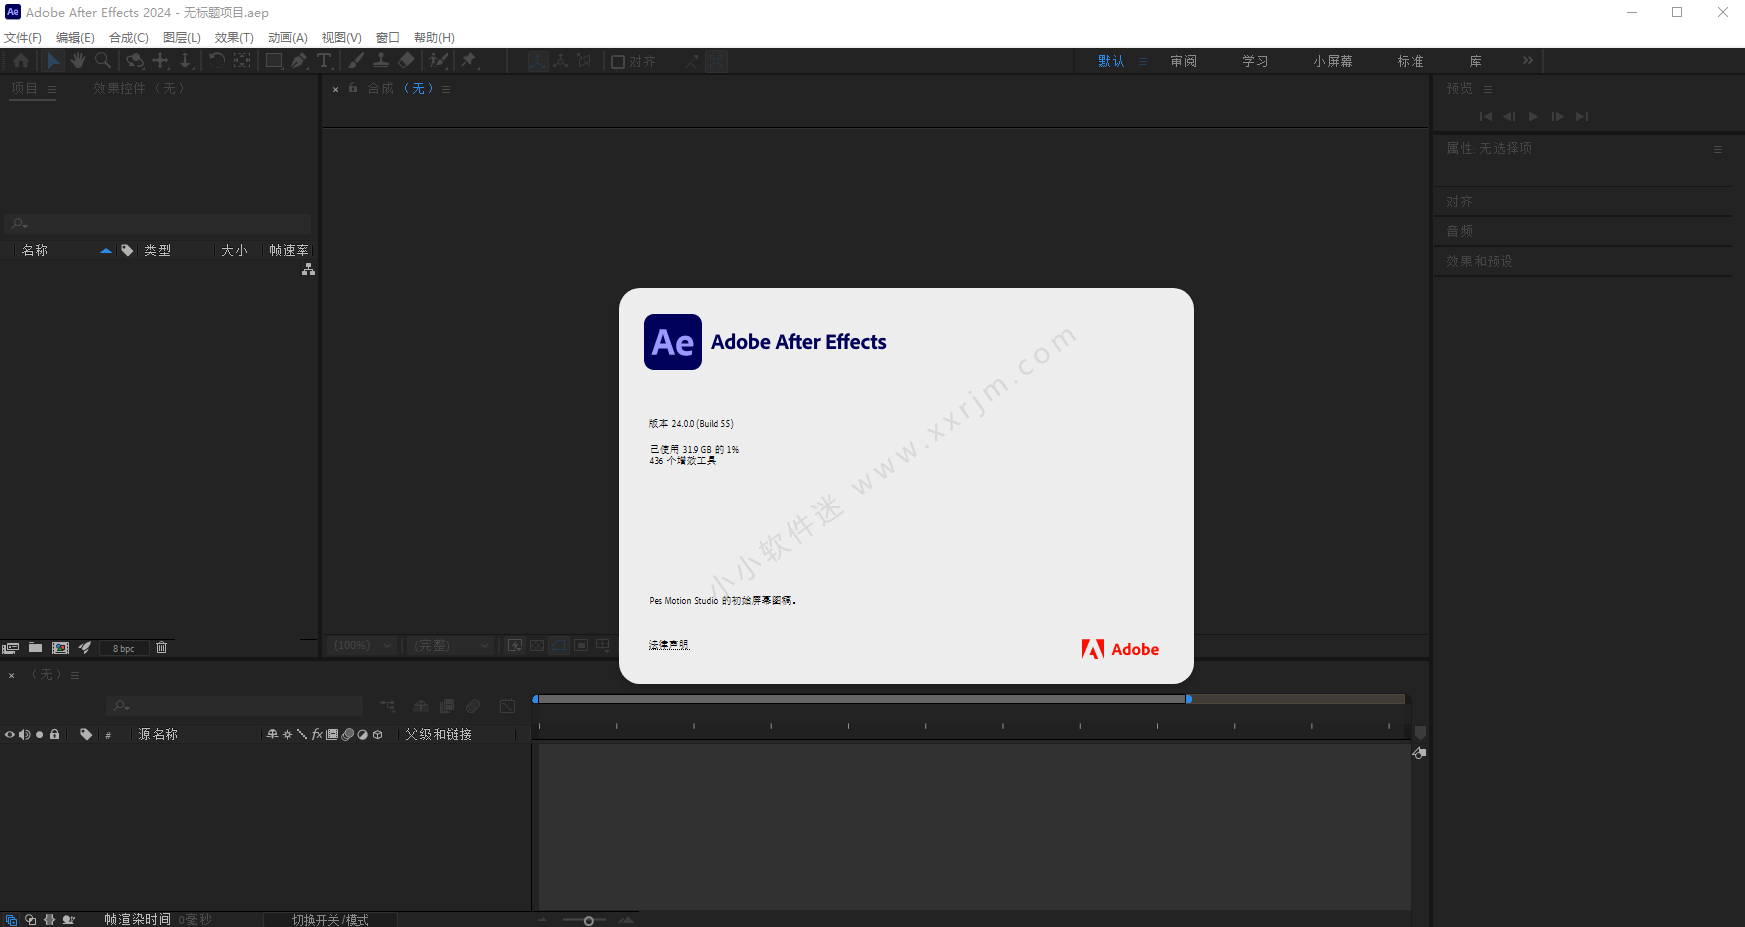 Adobe After Effects 2024 v24.0.0.55 instal the new for windows